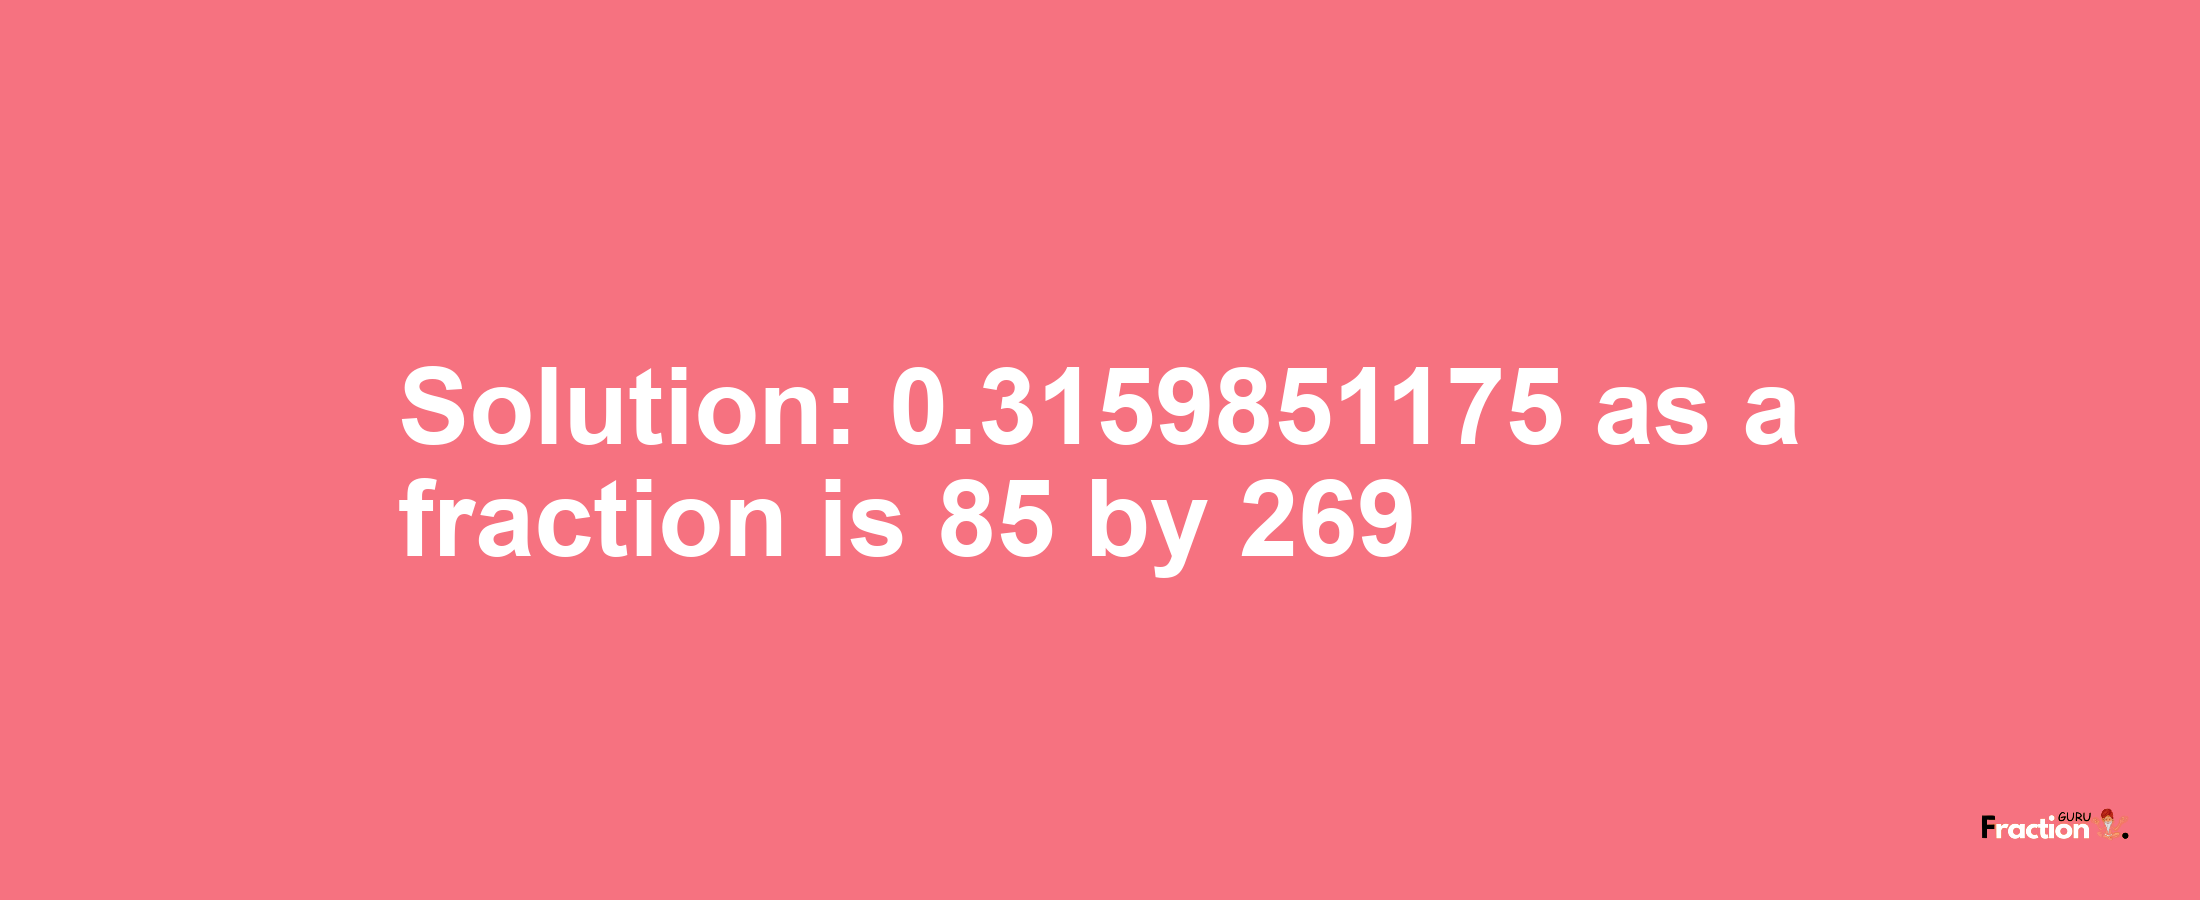 Solution:0.3159851175 as a fraction is 85/269